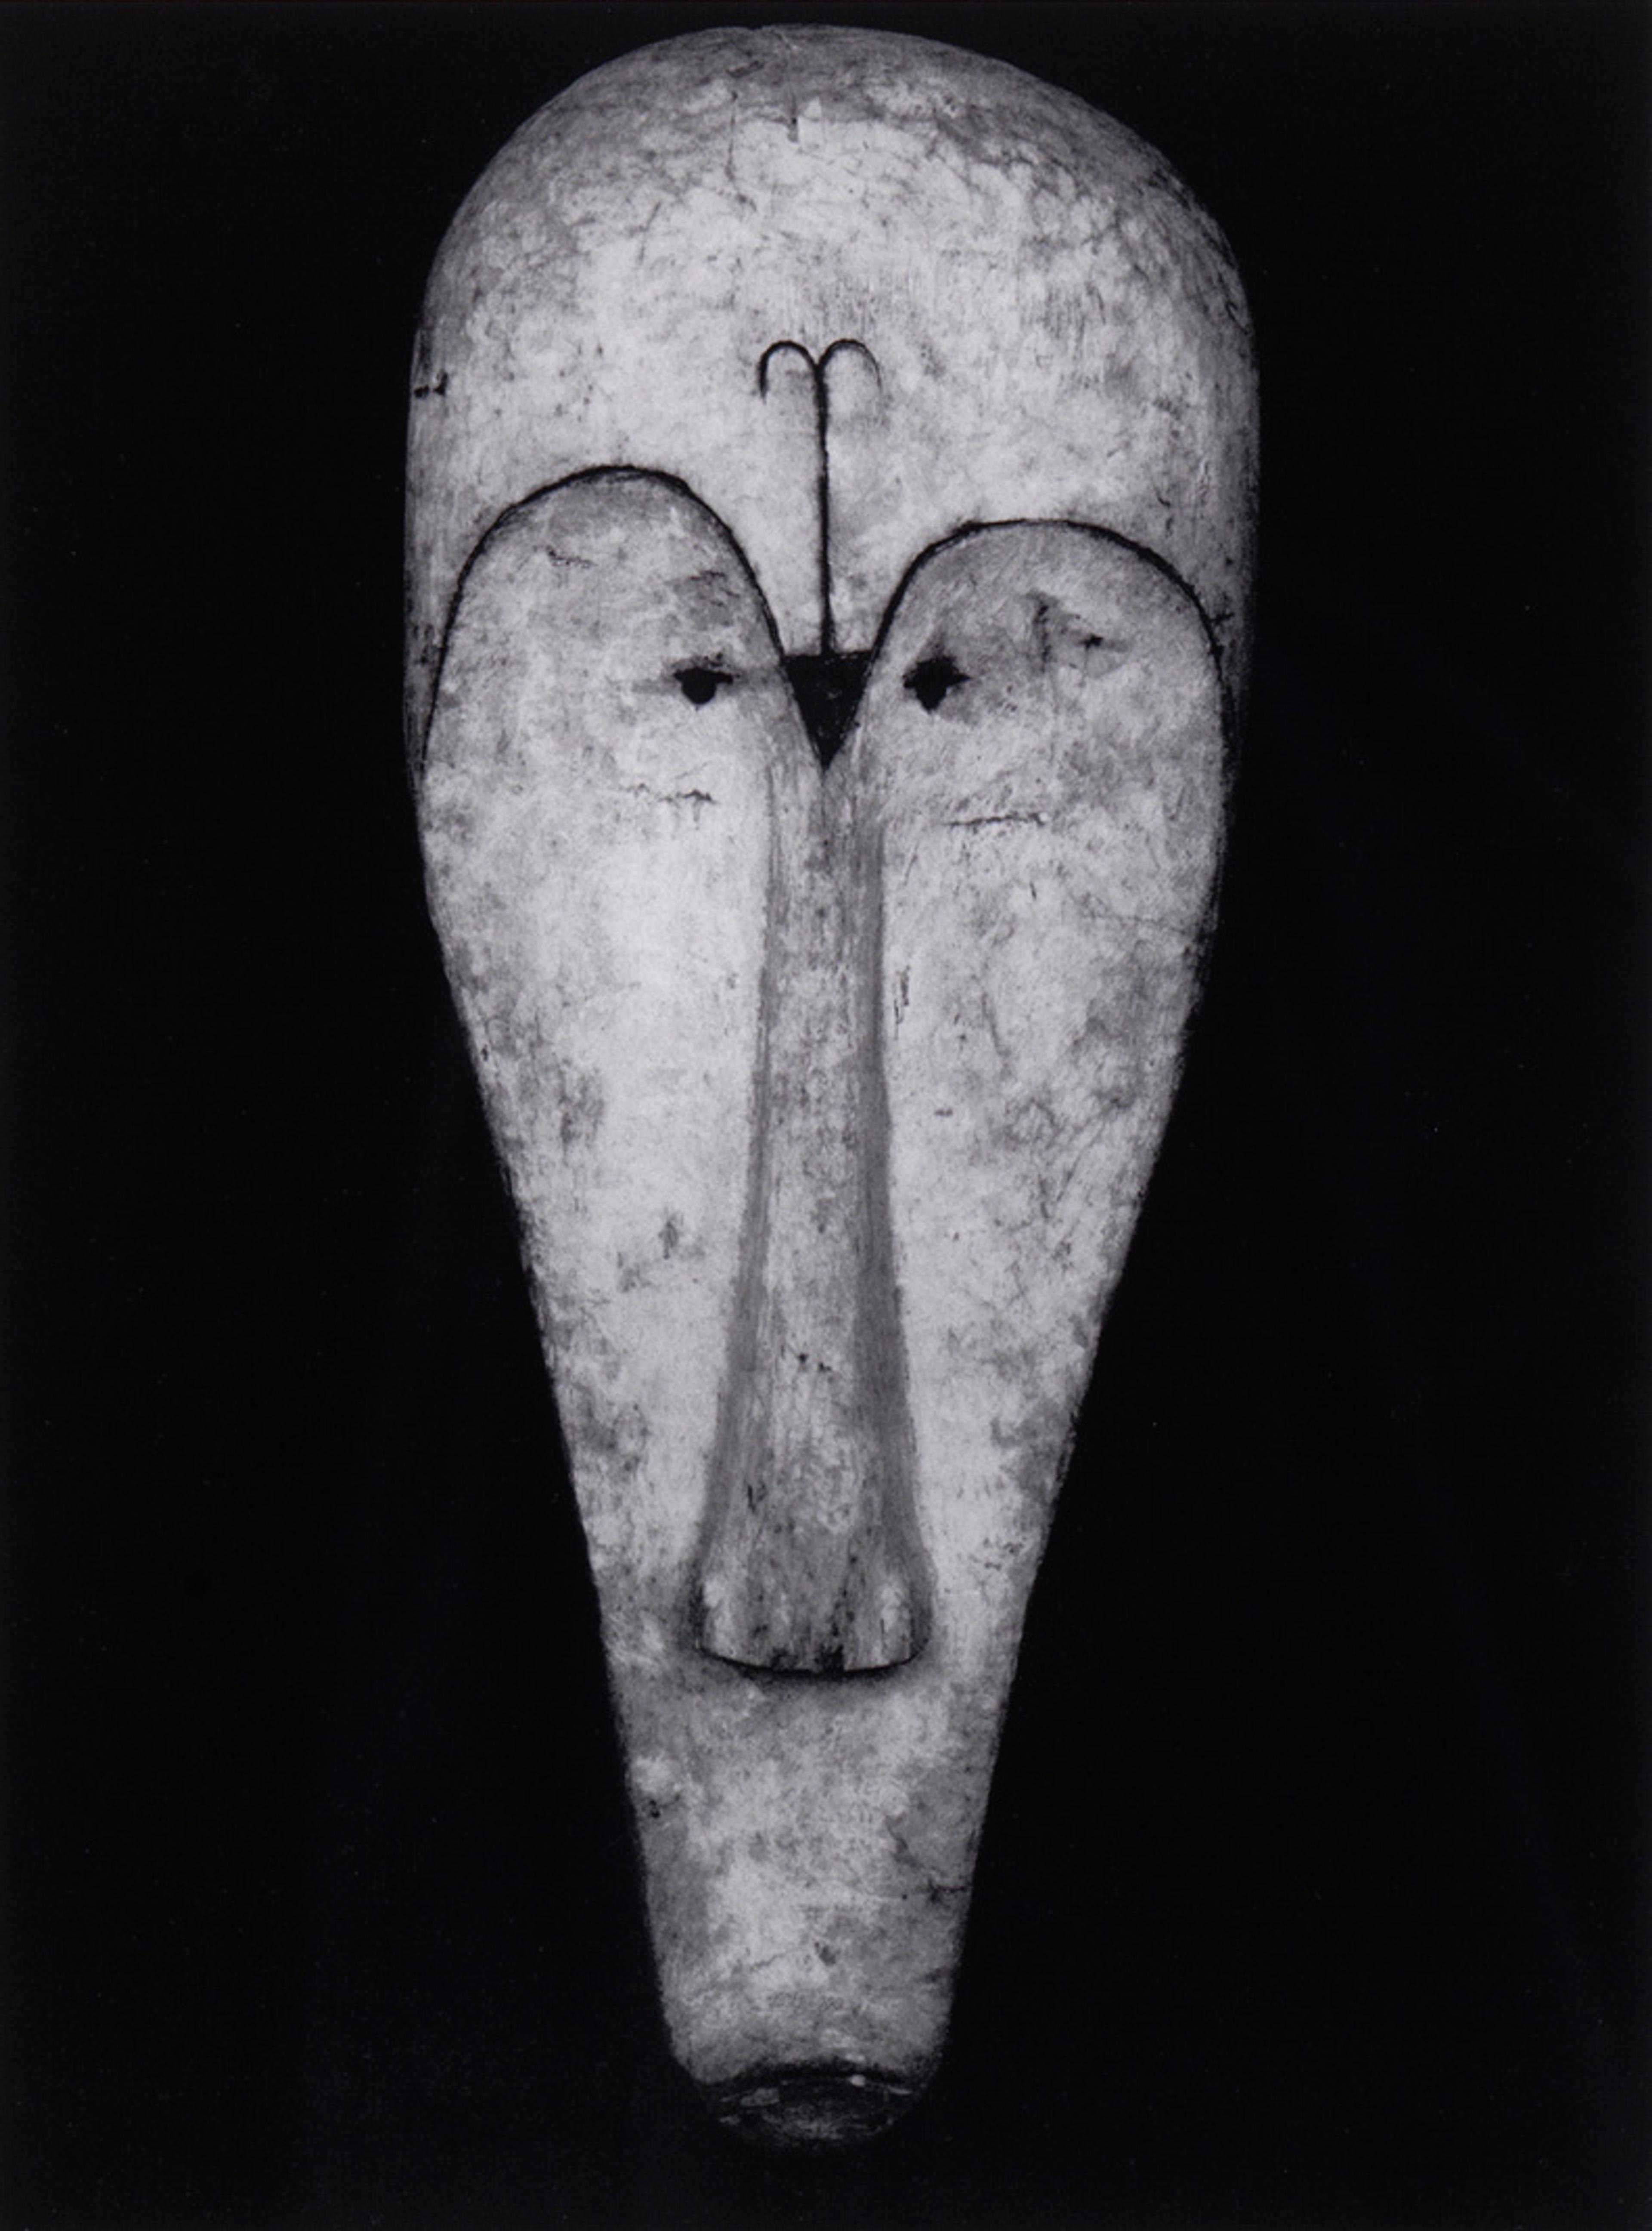 Sherrie Levine, African Masks After Walker Evans XIII, 2014, 1 of 24 giclée inkjet prints, edition 9 of 12. Courtesy of the Artist, Simon Lee Gallery and the Walker Evans Archive, Metropolitan Museum of Art, New York